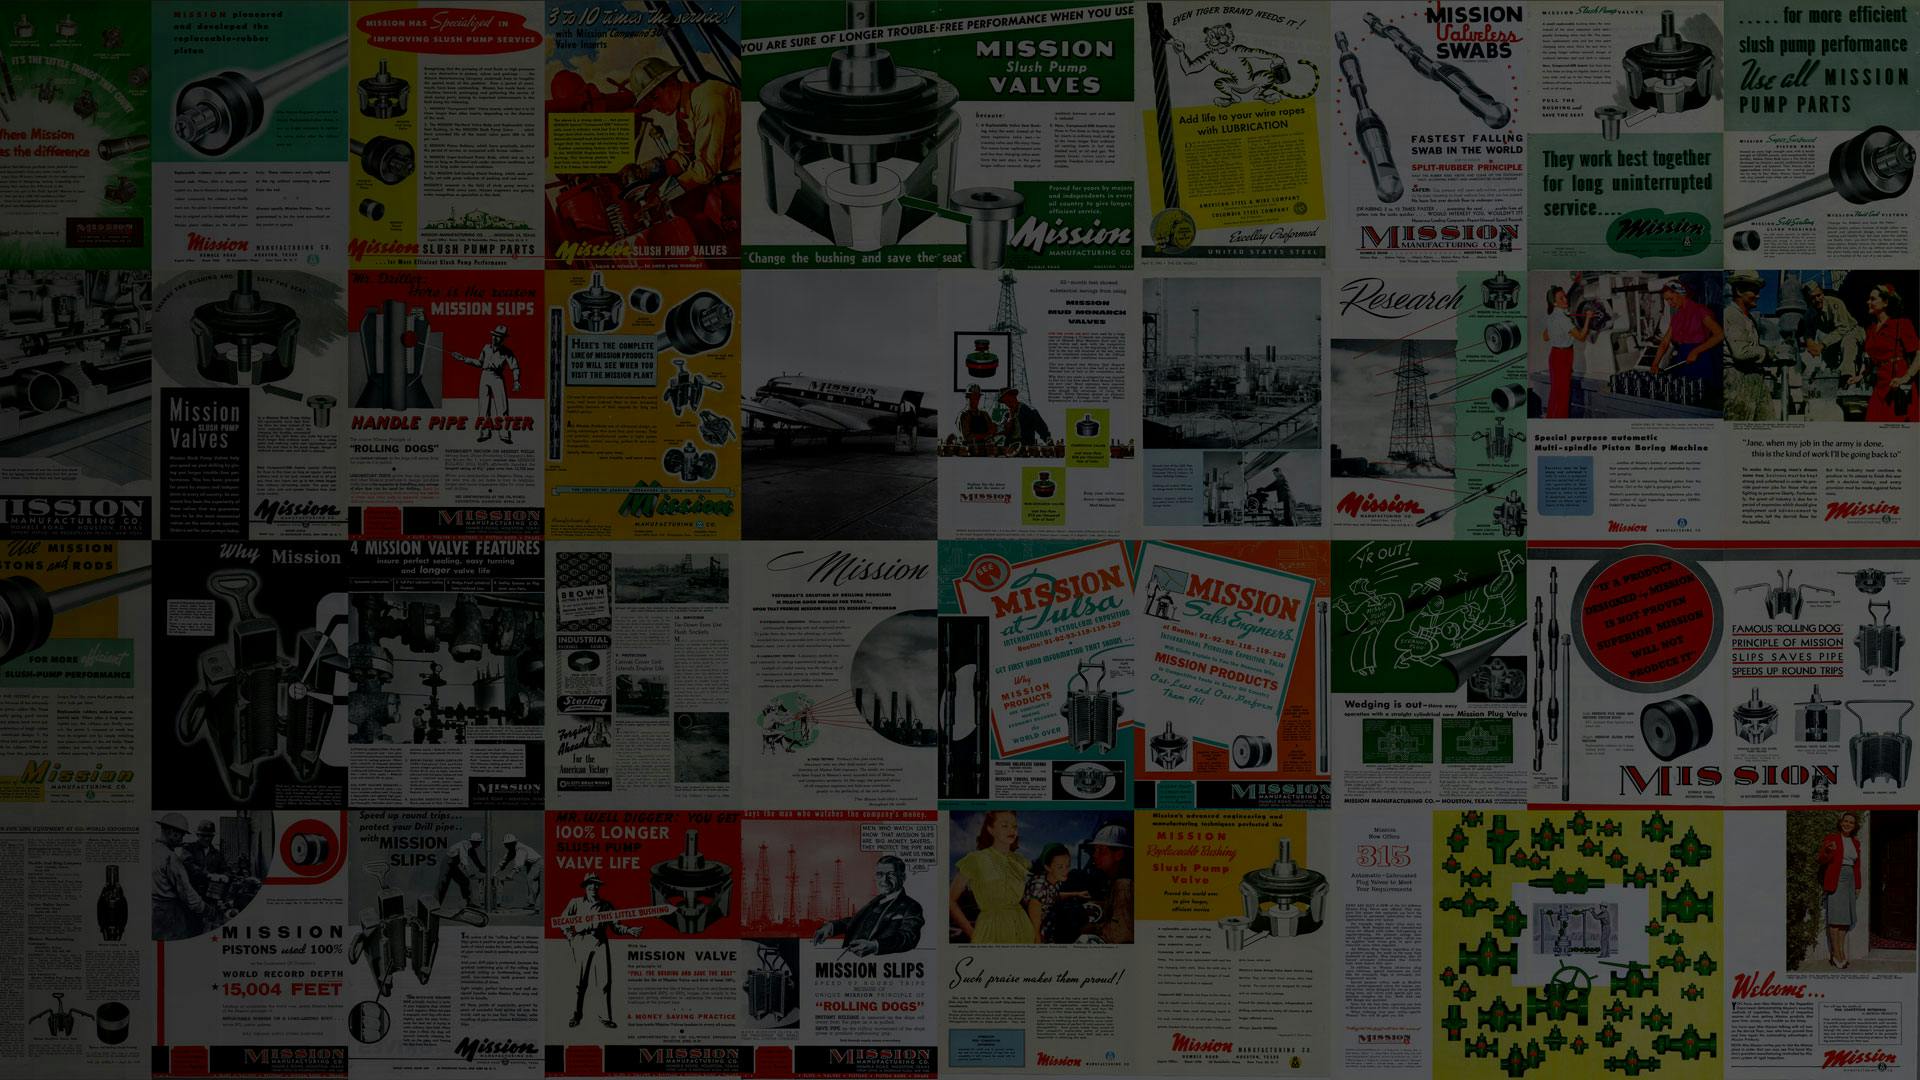 Collage of vintage MISSION ads and flyers